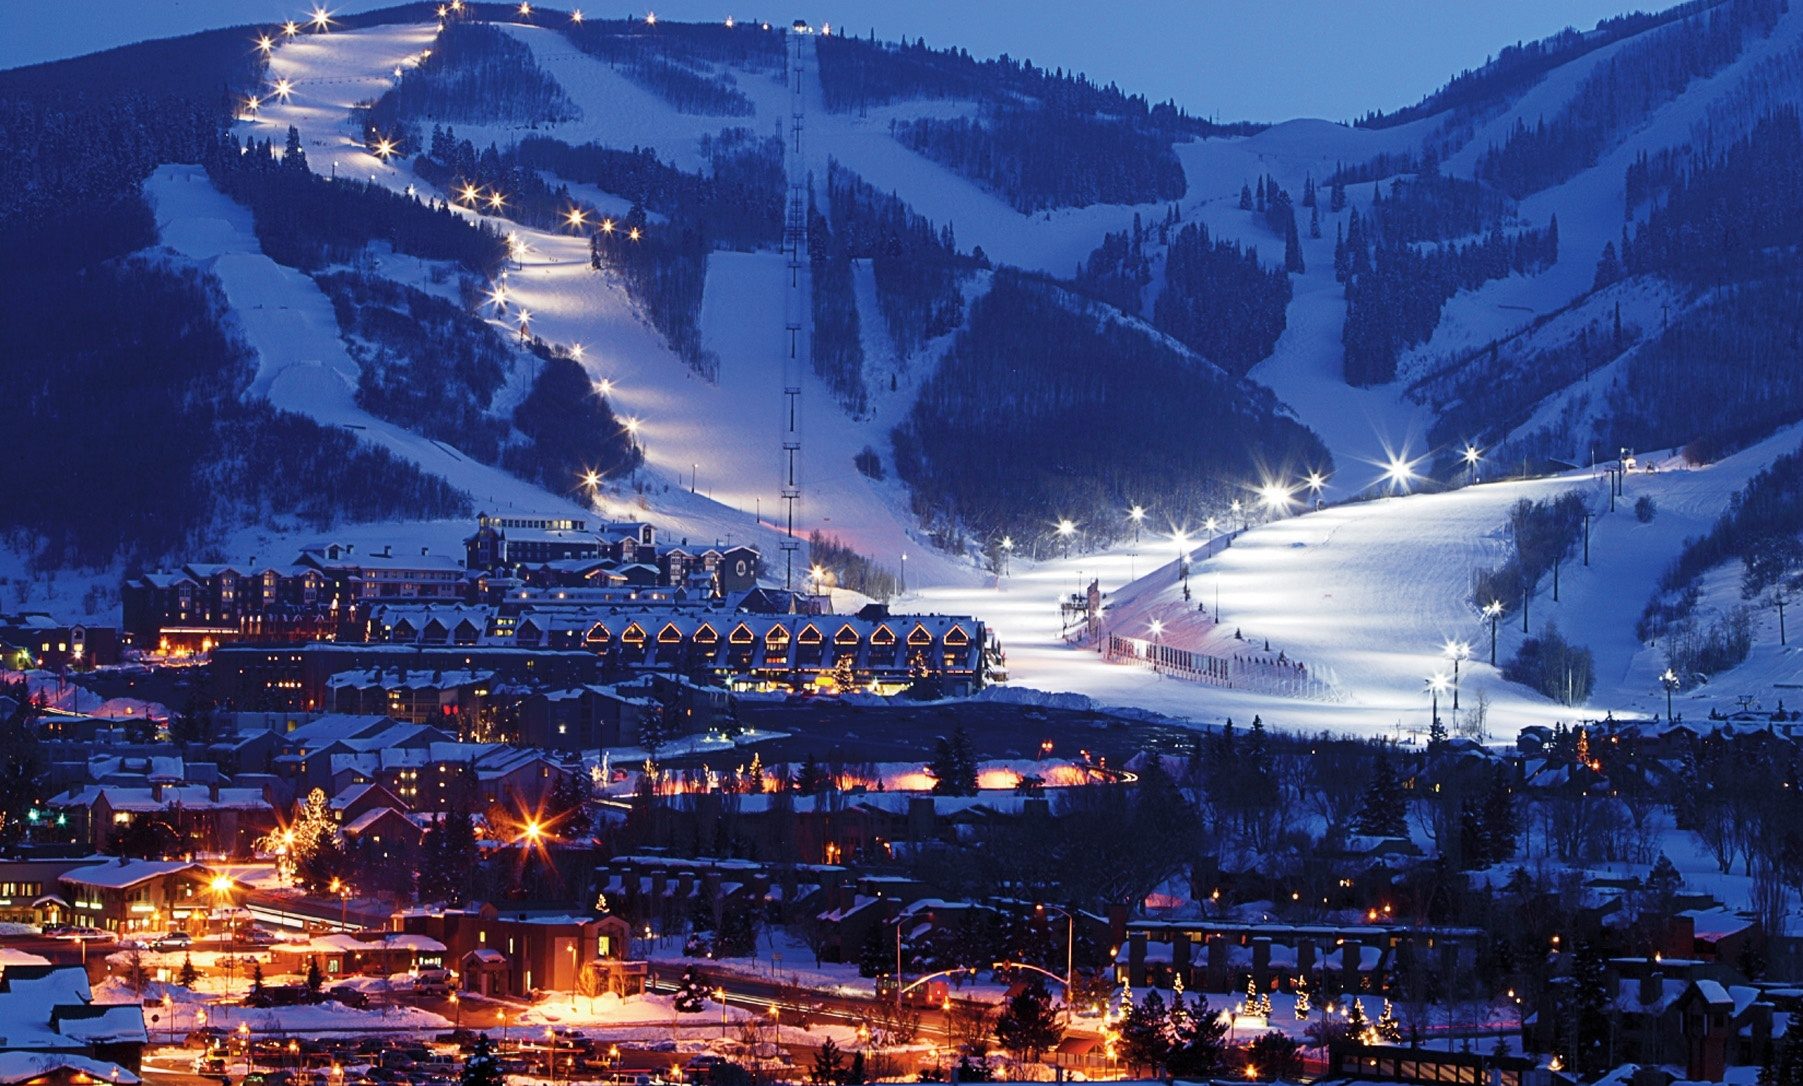 Featured image for “Condé Nast Traveler Readers Name Park City #3 on List of Best Small Cities in the U.S.”